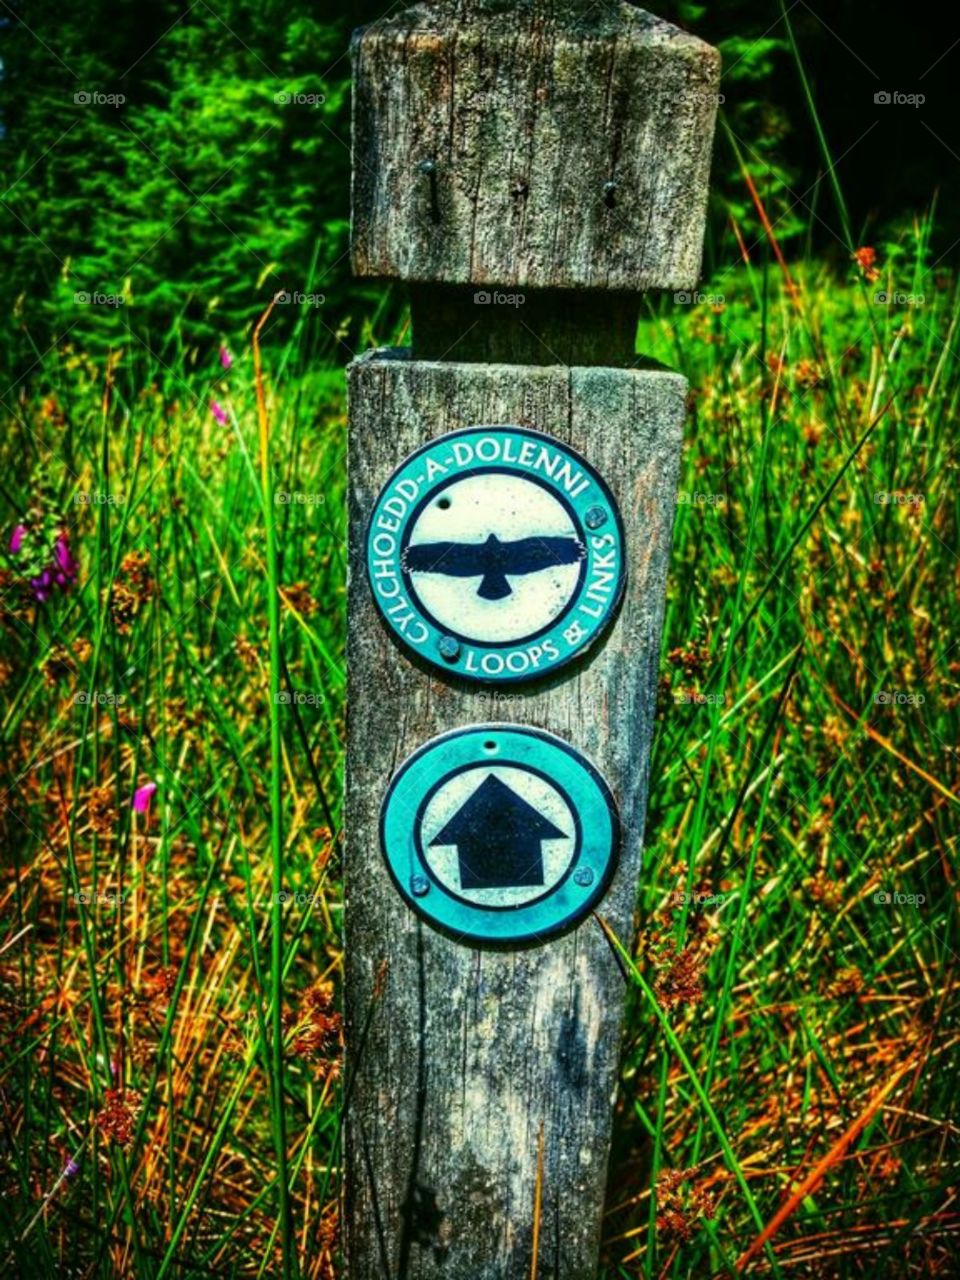 Signpost in forestry on Cwmbach mountain, Aberdare, South Wales (July 2018)